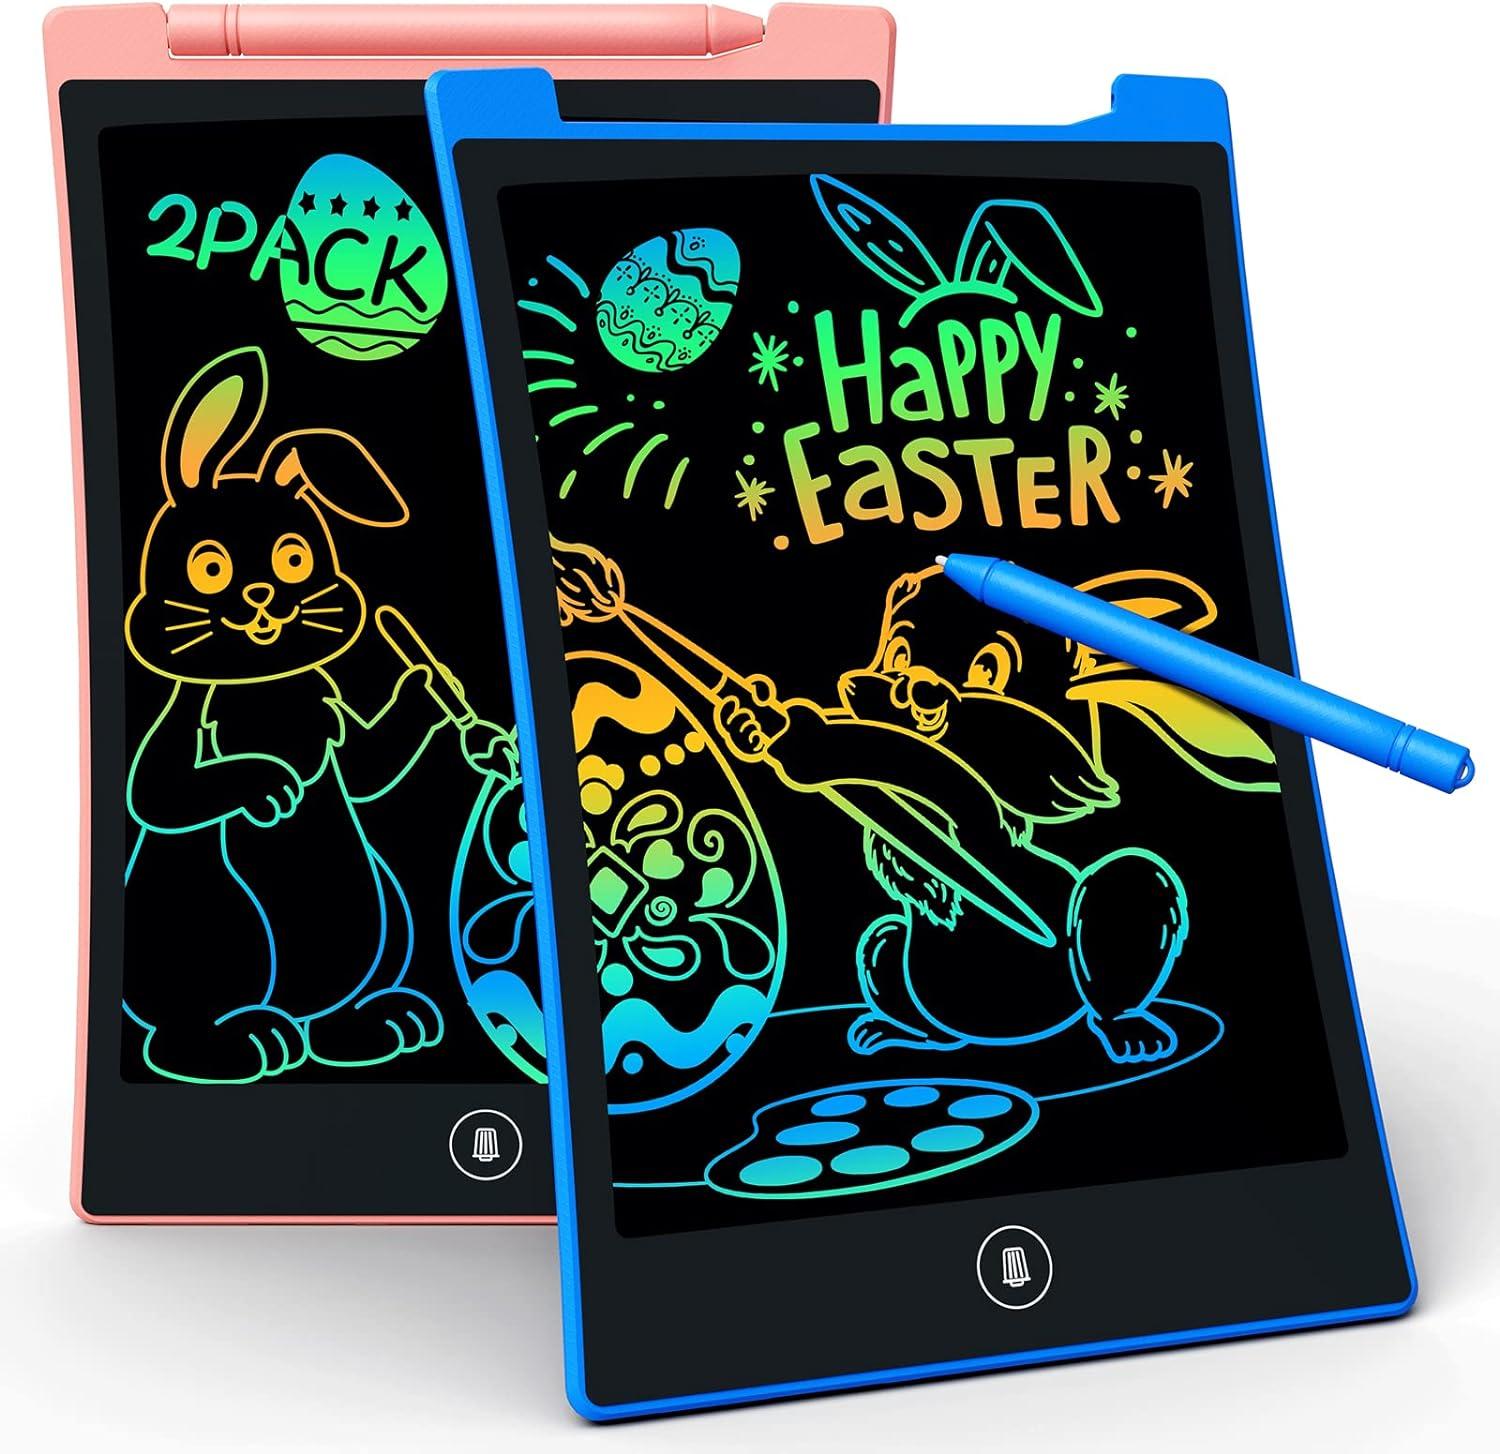 Kids Toys 2 Pack LCD Writing Tablet for $4.99